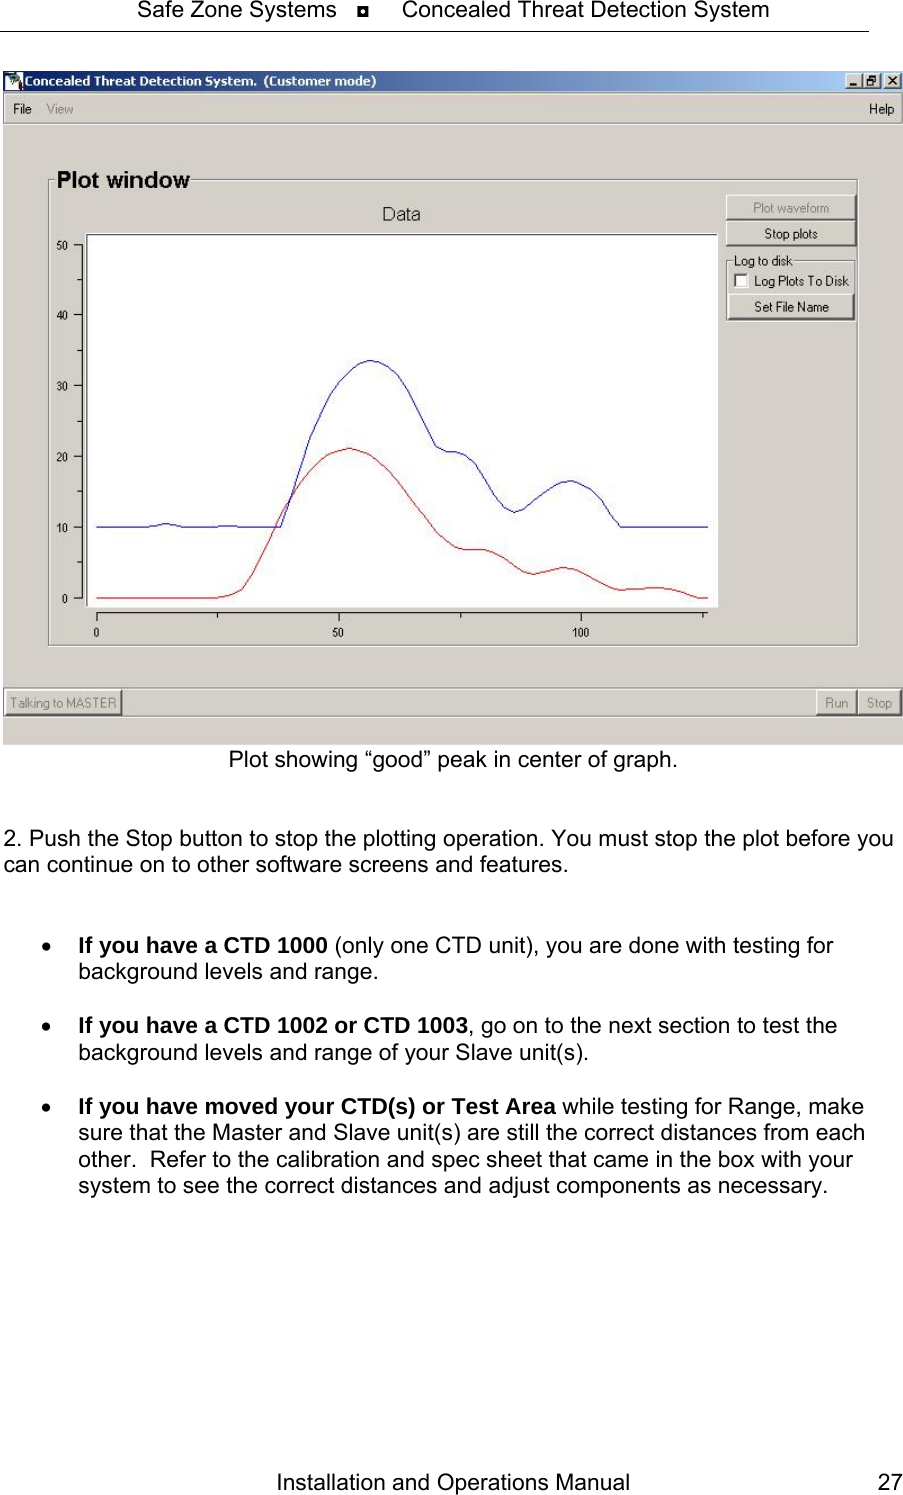 Safe Zone Systems   ◘     Concealed Threat Detection System   Plot showing “good” peak in center of graph.   2. Push the Stop button to stop the plotting operation. You must stop the plot before you can continue on to other software screens and features.    • If you have a CTD 1000 (only one CTD unit), you are done with testing for background levels and range.  • If you have a CTD 1002 or CTD 1003, go on to the next section to test the background levels and range of your Slave unit(s).  • If you have moved your CTD(s) or Test Area while testing for Range, make sure that the Master and Slave unit(s) are still the correct distances from each other.  Refer to the calibration and spec sheet that came in the box with your system to see the correct distances and adjust components as necessary.  Installation and Operations Manual  27